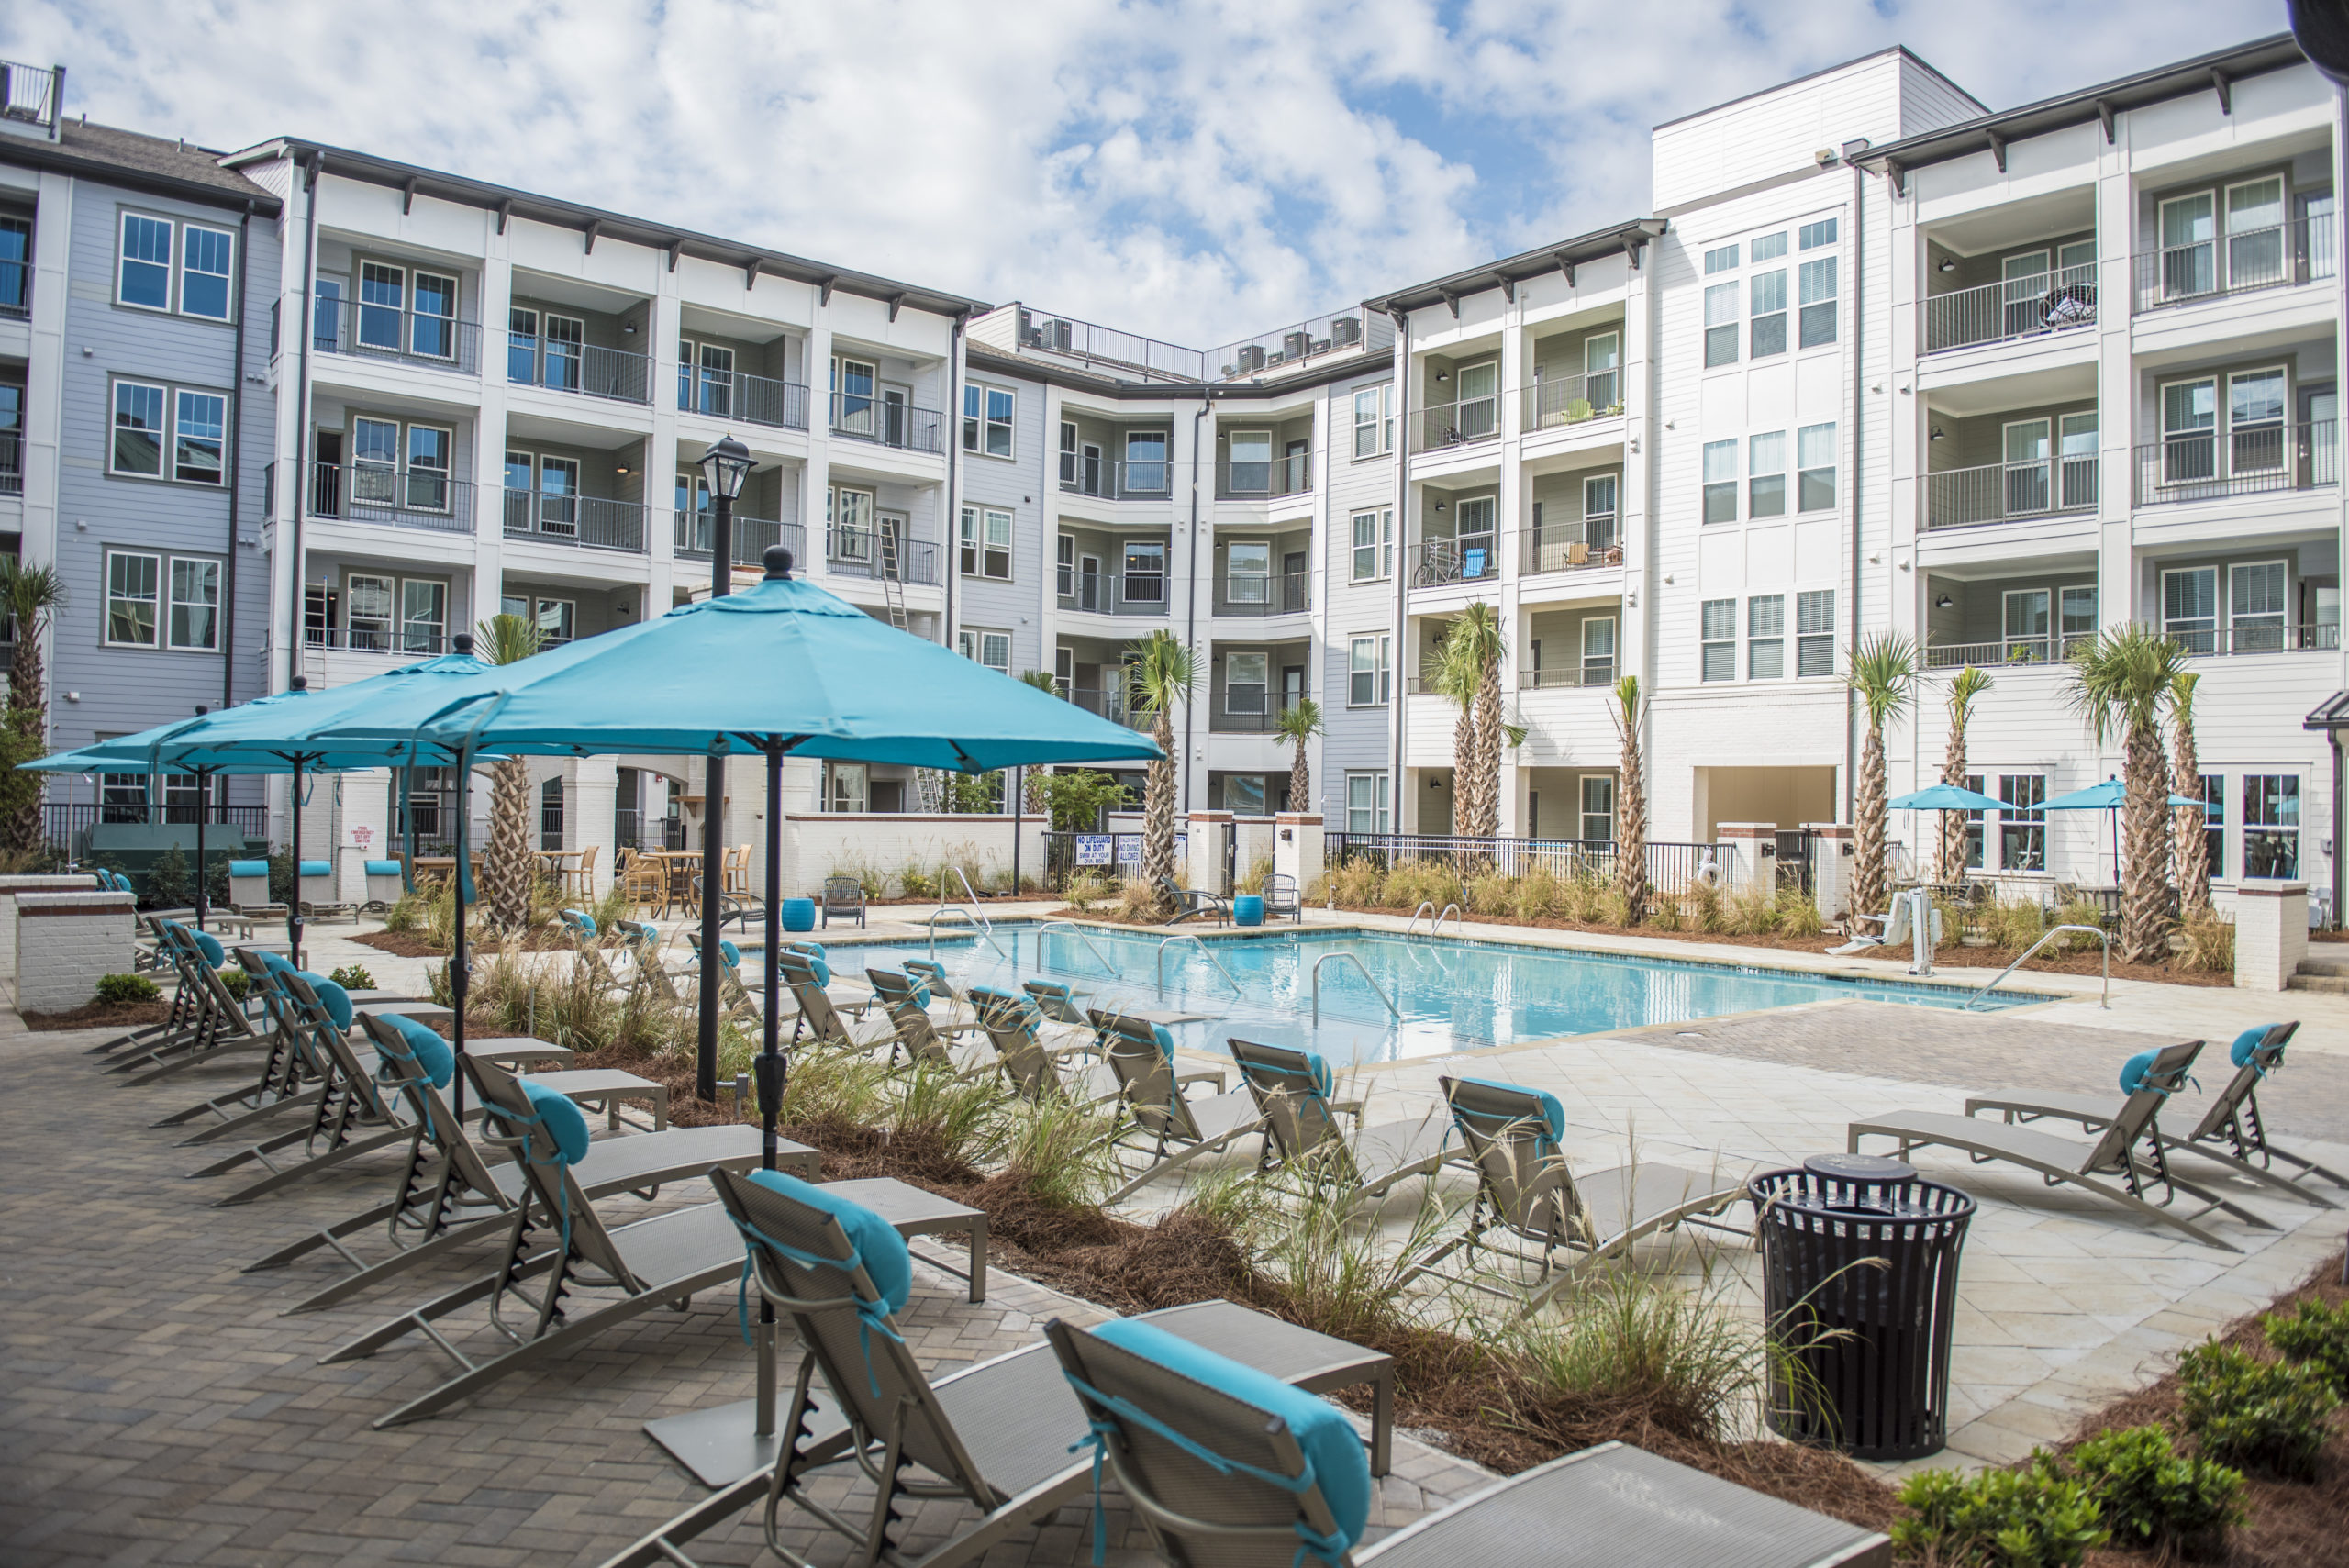 Ironwood – North Augusta, SC - Pool and Lounge Area